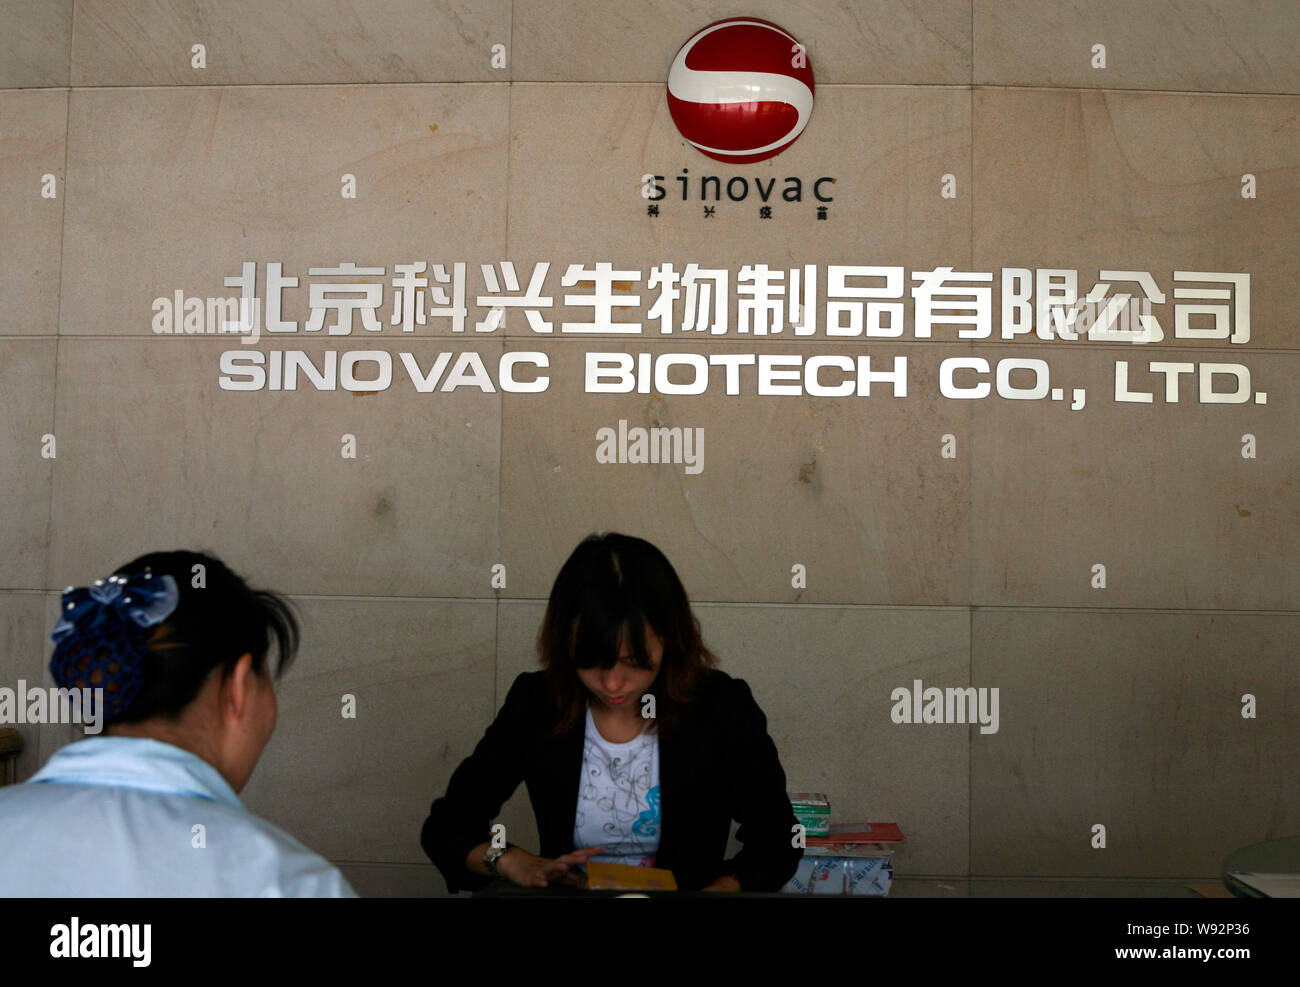 --FILE--Chinese employees work at the front desk of Sinovac Biotech Co., Ltd. in Beijing, China, 15 September 2009.   China-based Sinovac Biotech Ltd. Stock Photo